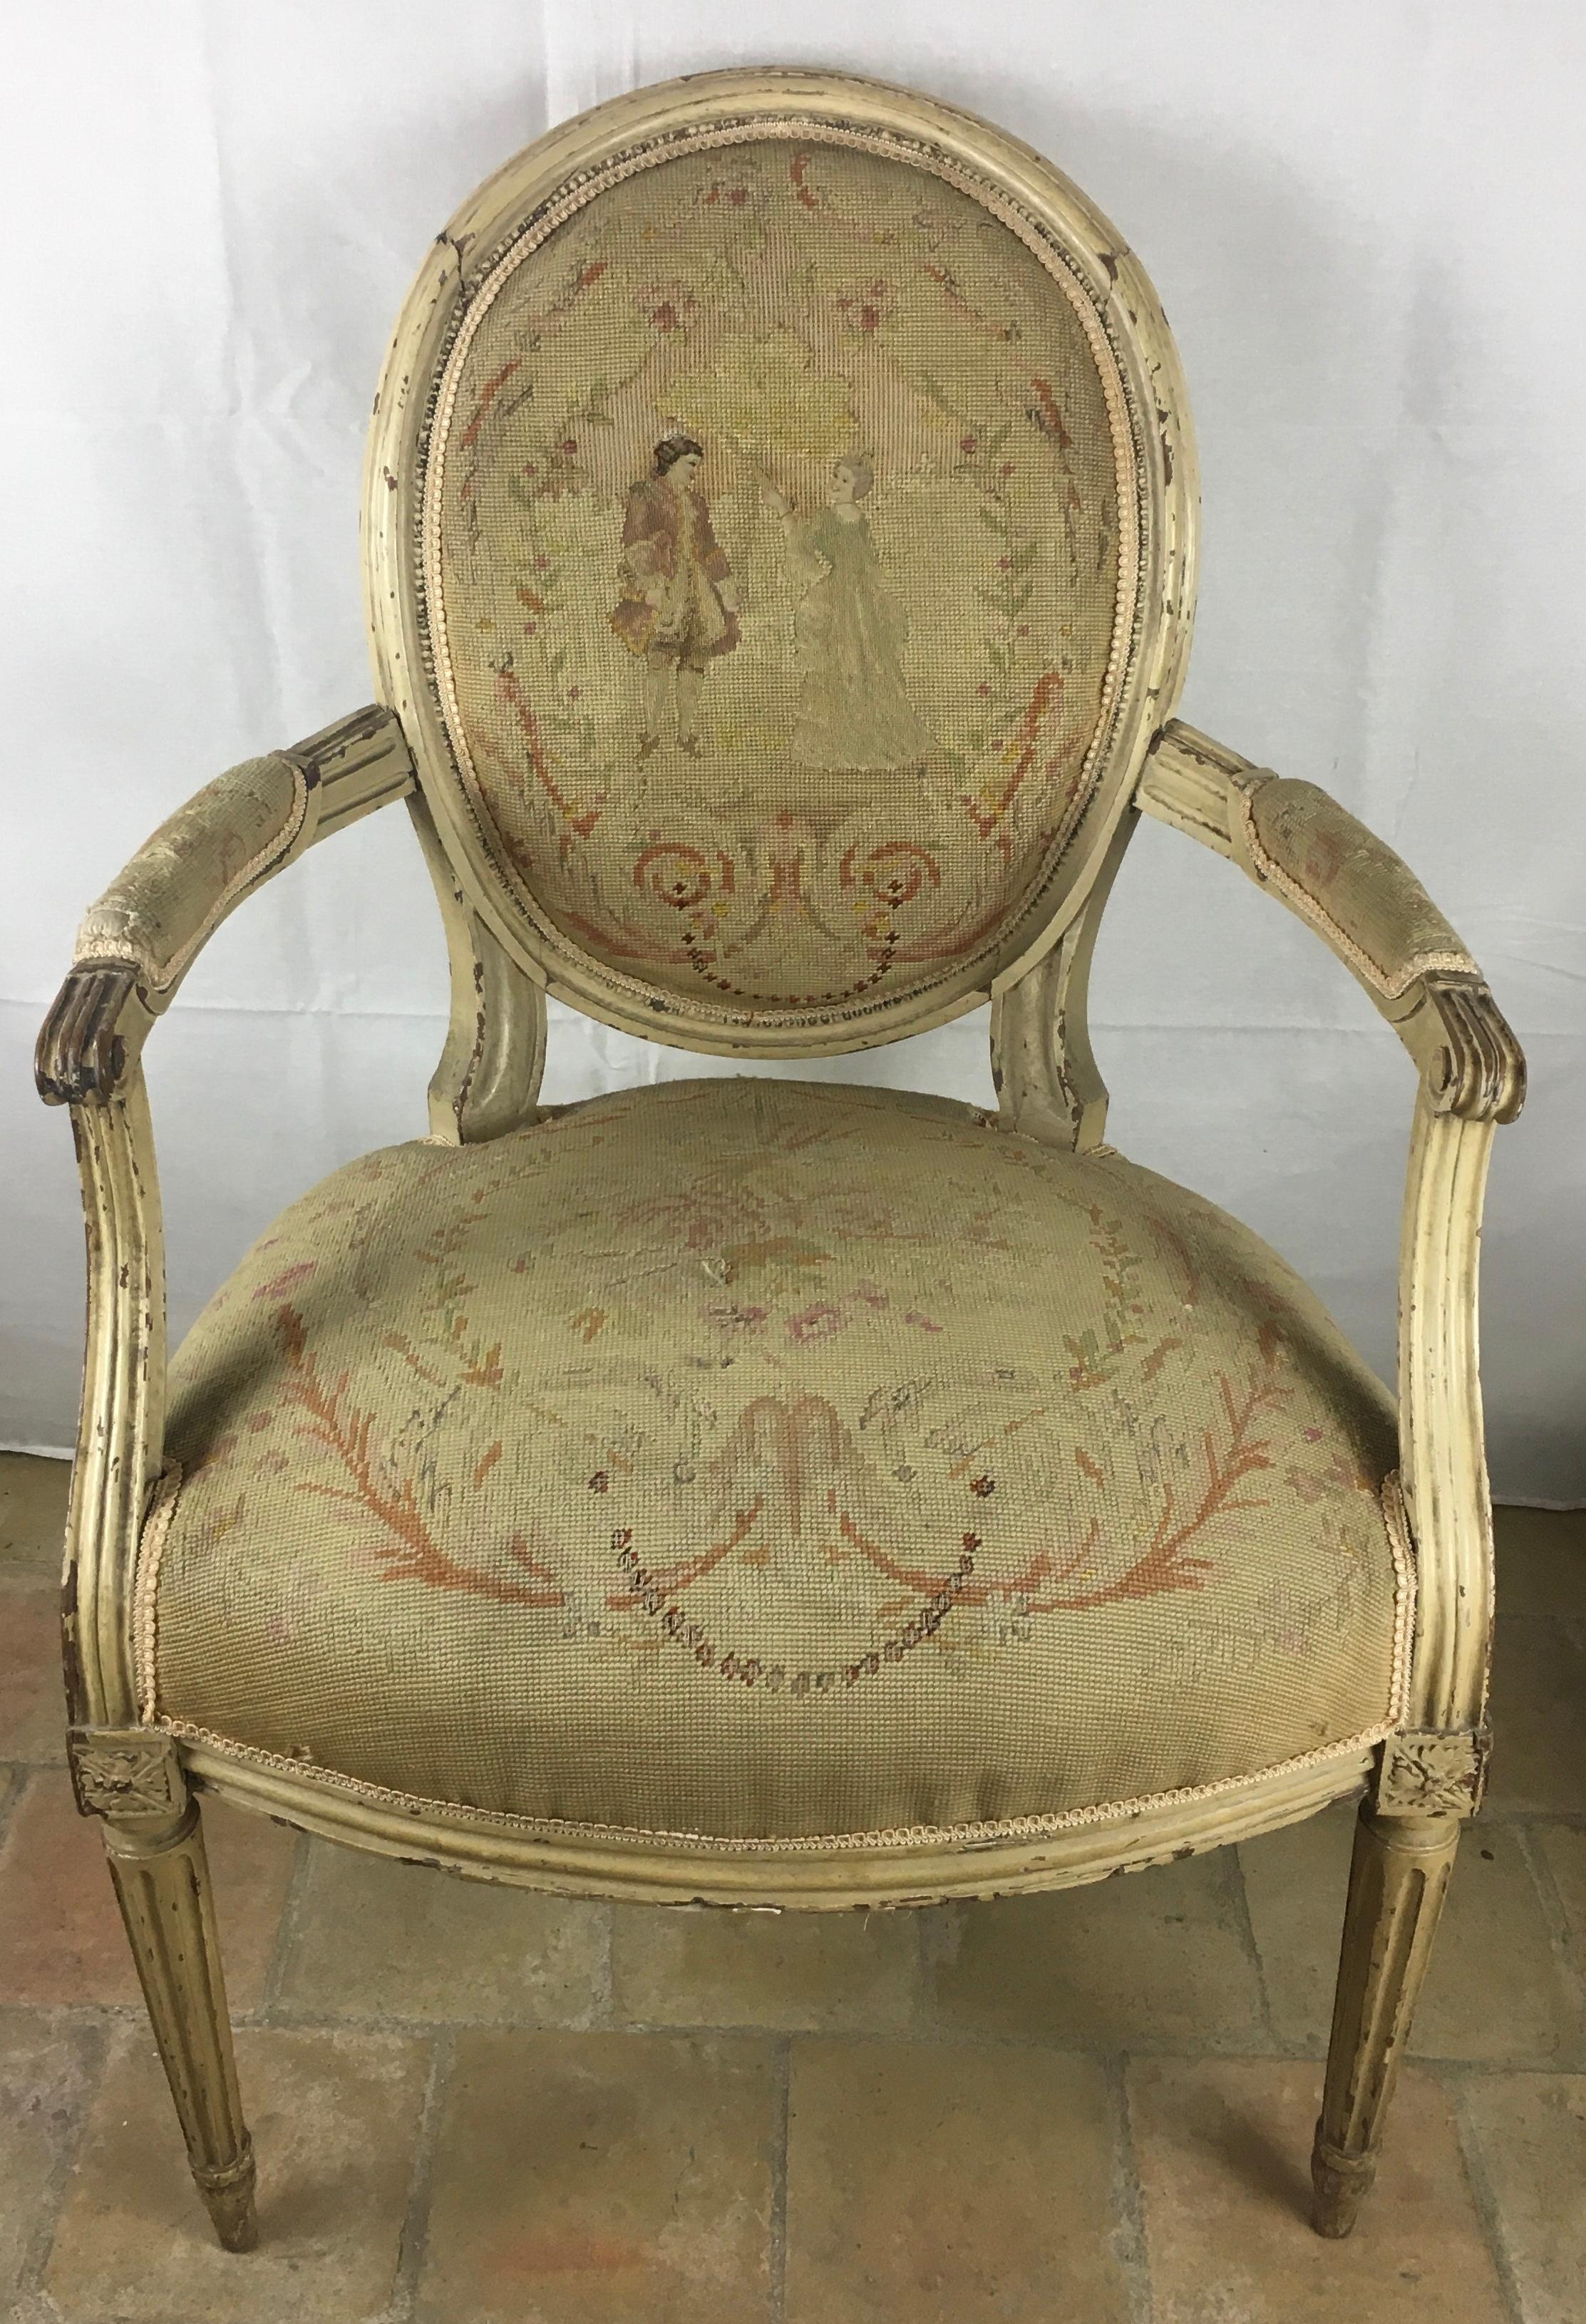 Very fine pair of 18th century French Louis XVI armchairs, scrolled arms, over bow fronted seat, standing on  fluted legs. Retaining mostly original paint and with period needlework upholstery. Presumably Aubusson fabric.  Chairs need to be